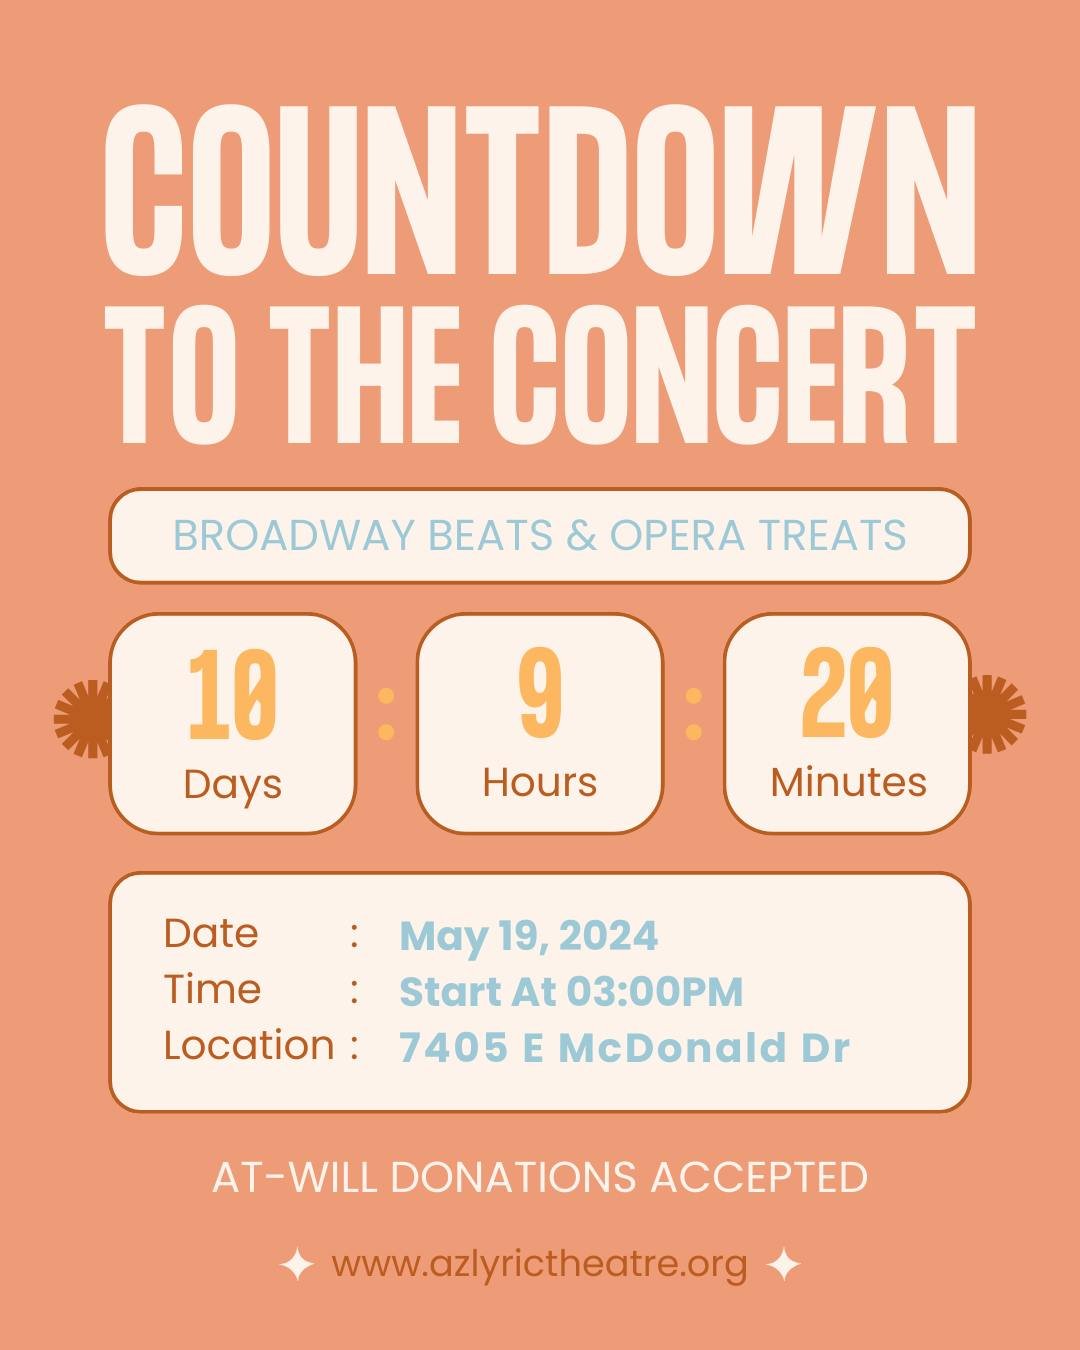 🎶 Only TEN days until our &quot;Broadway Beats &amp; Opera Treats&quot; concert! 🎉 

📅 Date: May 19th
🕒 Time: 3:00pm
📍 Location: First Christian Church Scottsdale, 7405 E McDonald Dr, Scottsdale, AZ 85250

Get ready to experience the best of bot